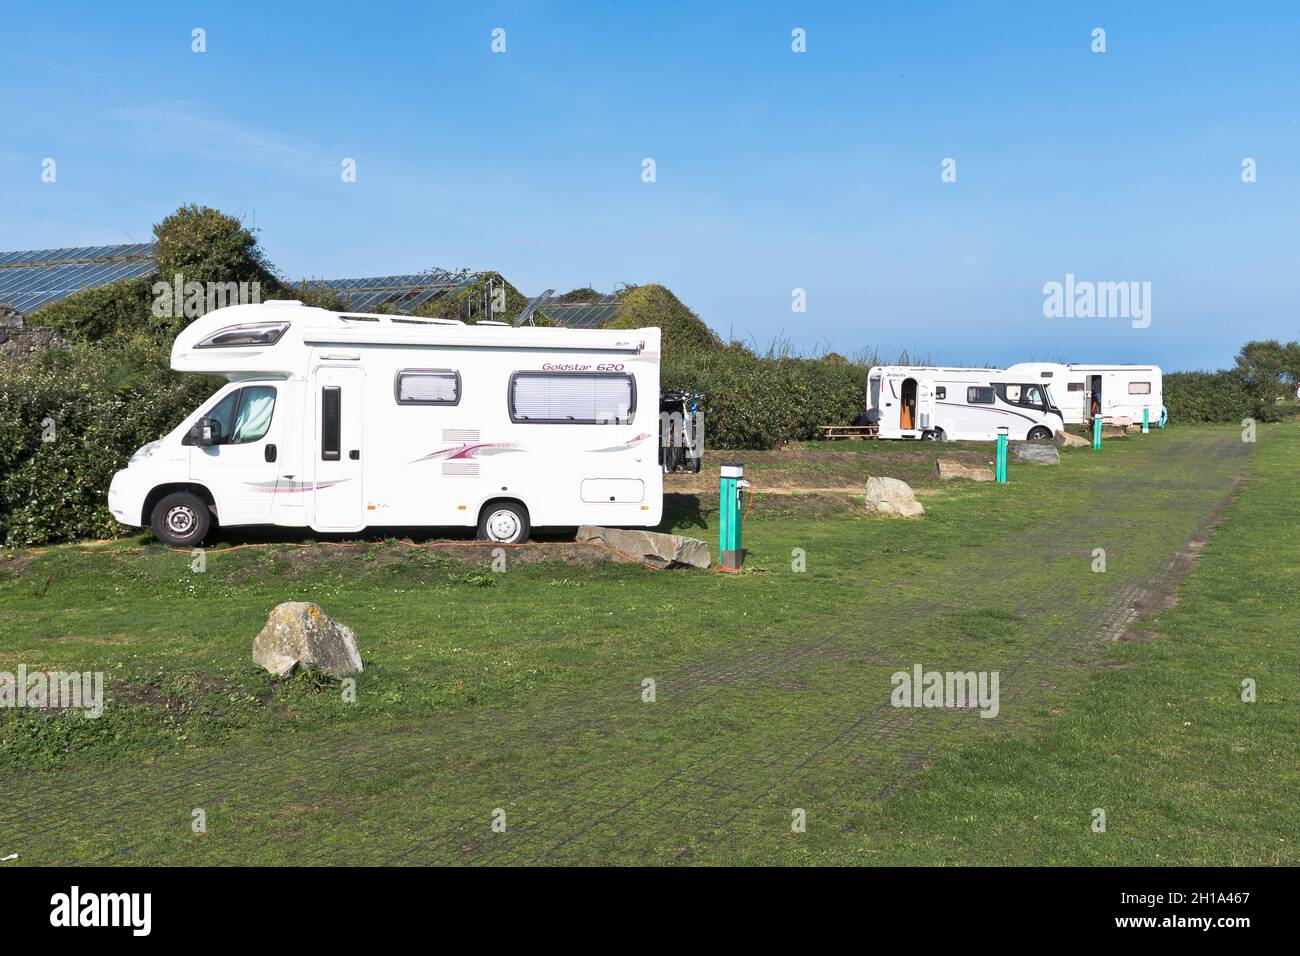 dh Beaucette Marina VALE GUERNSEY Campervan camping site camper vans holiday Stock Photo